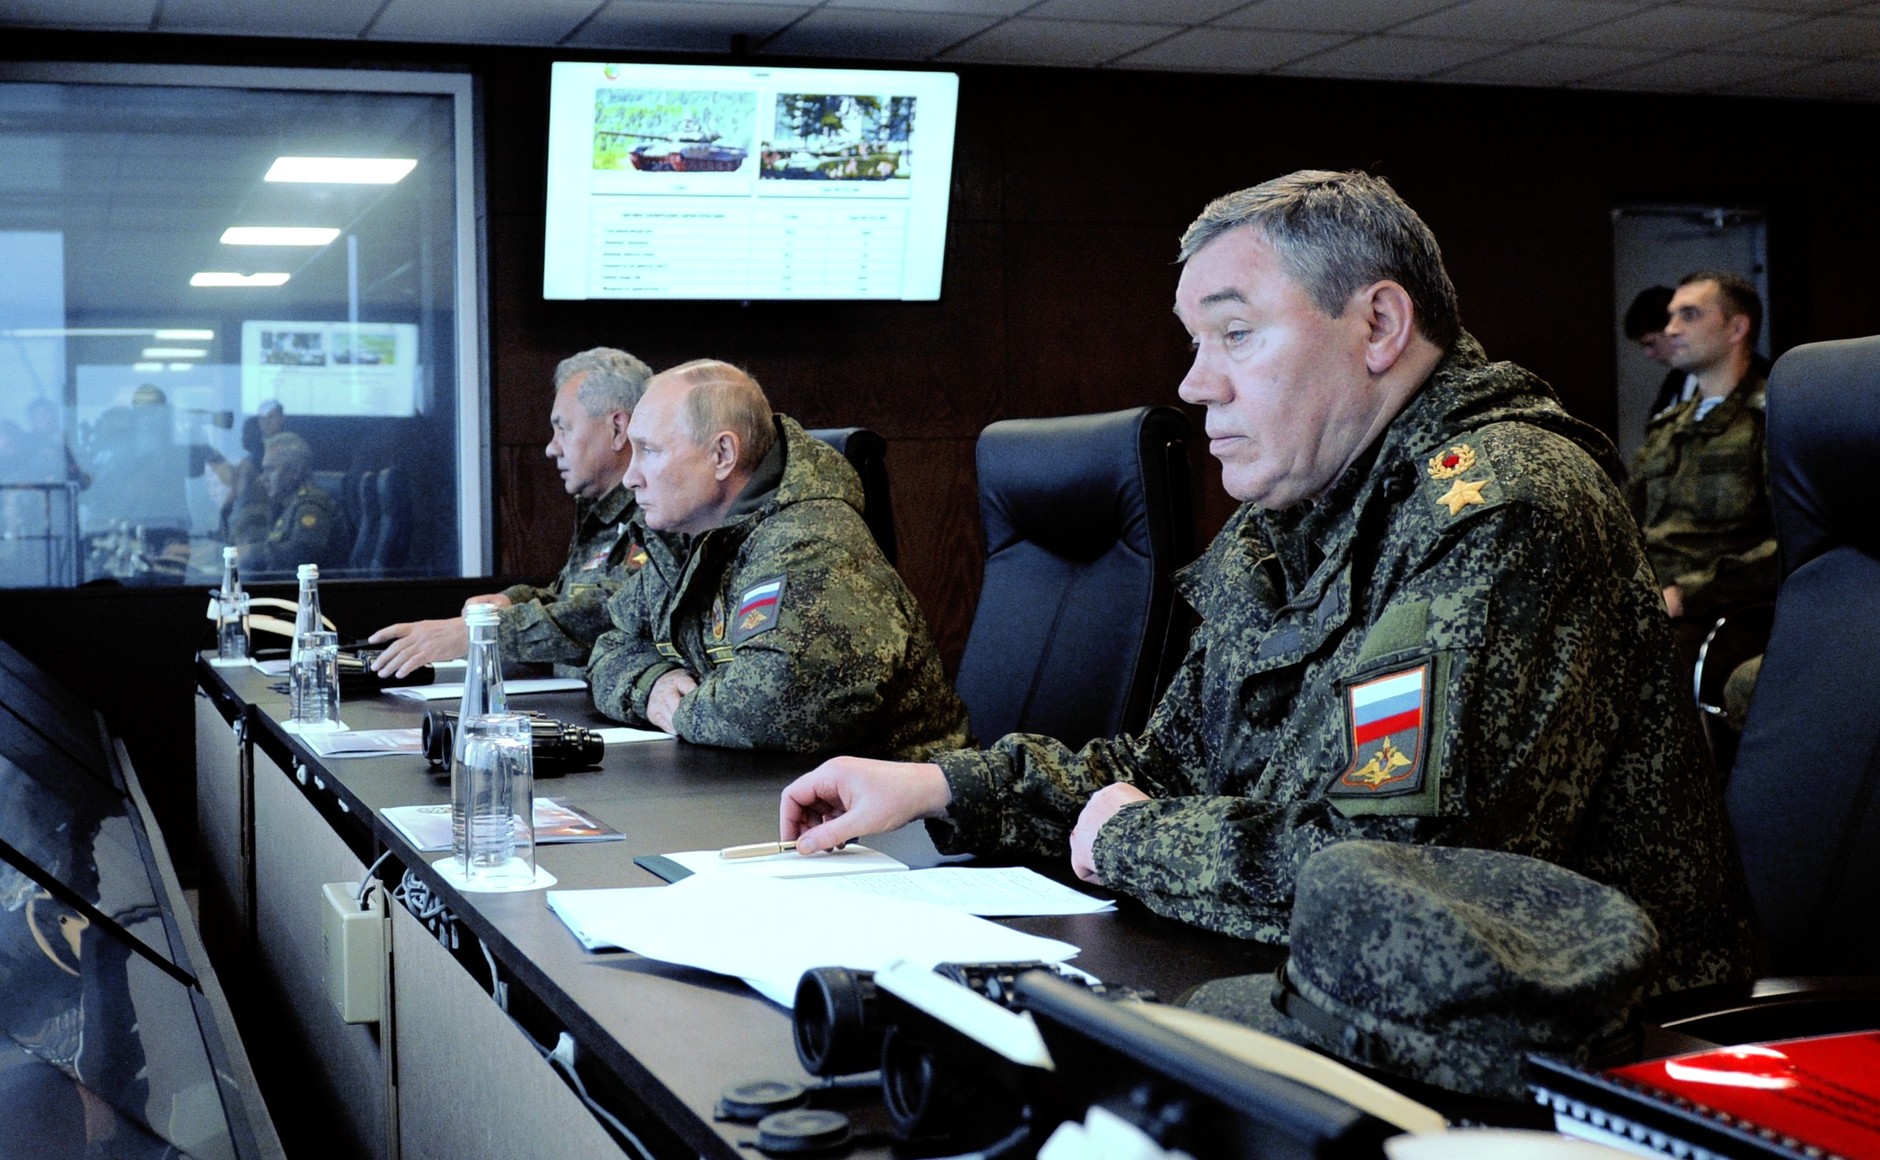 Vladimir Putin, center, together with Defence Minister Sergei Shoigu, left, and Chief of the General Staff of the Russian Armed Forces and First Deputy Defence Minister Valery Gerasimov, right, observe the main stage of the Vostok-2022 strategic command post exercise at the Sergeyevsky range in the Primorye Territory on September 6.